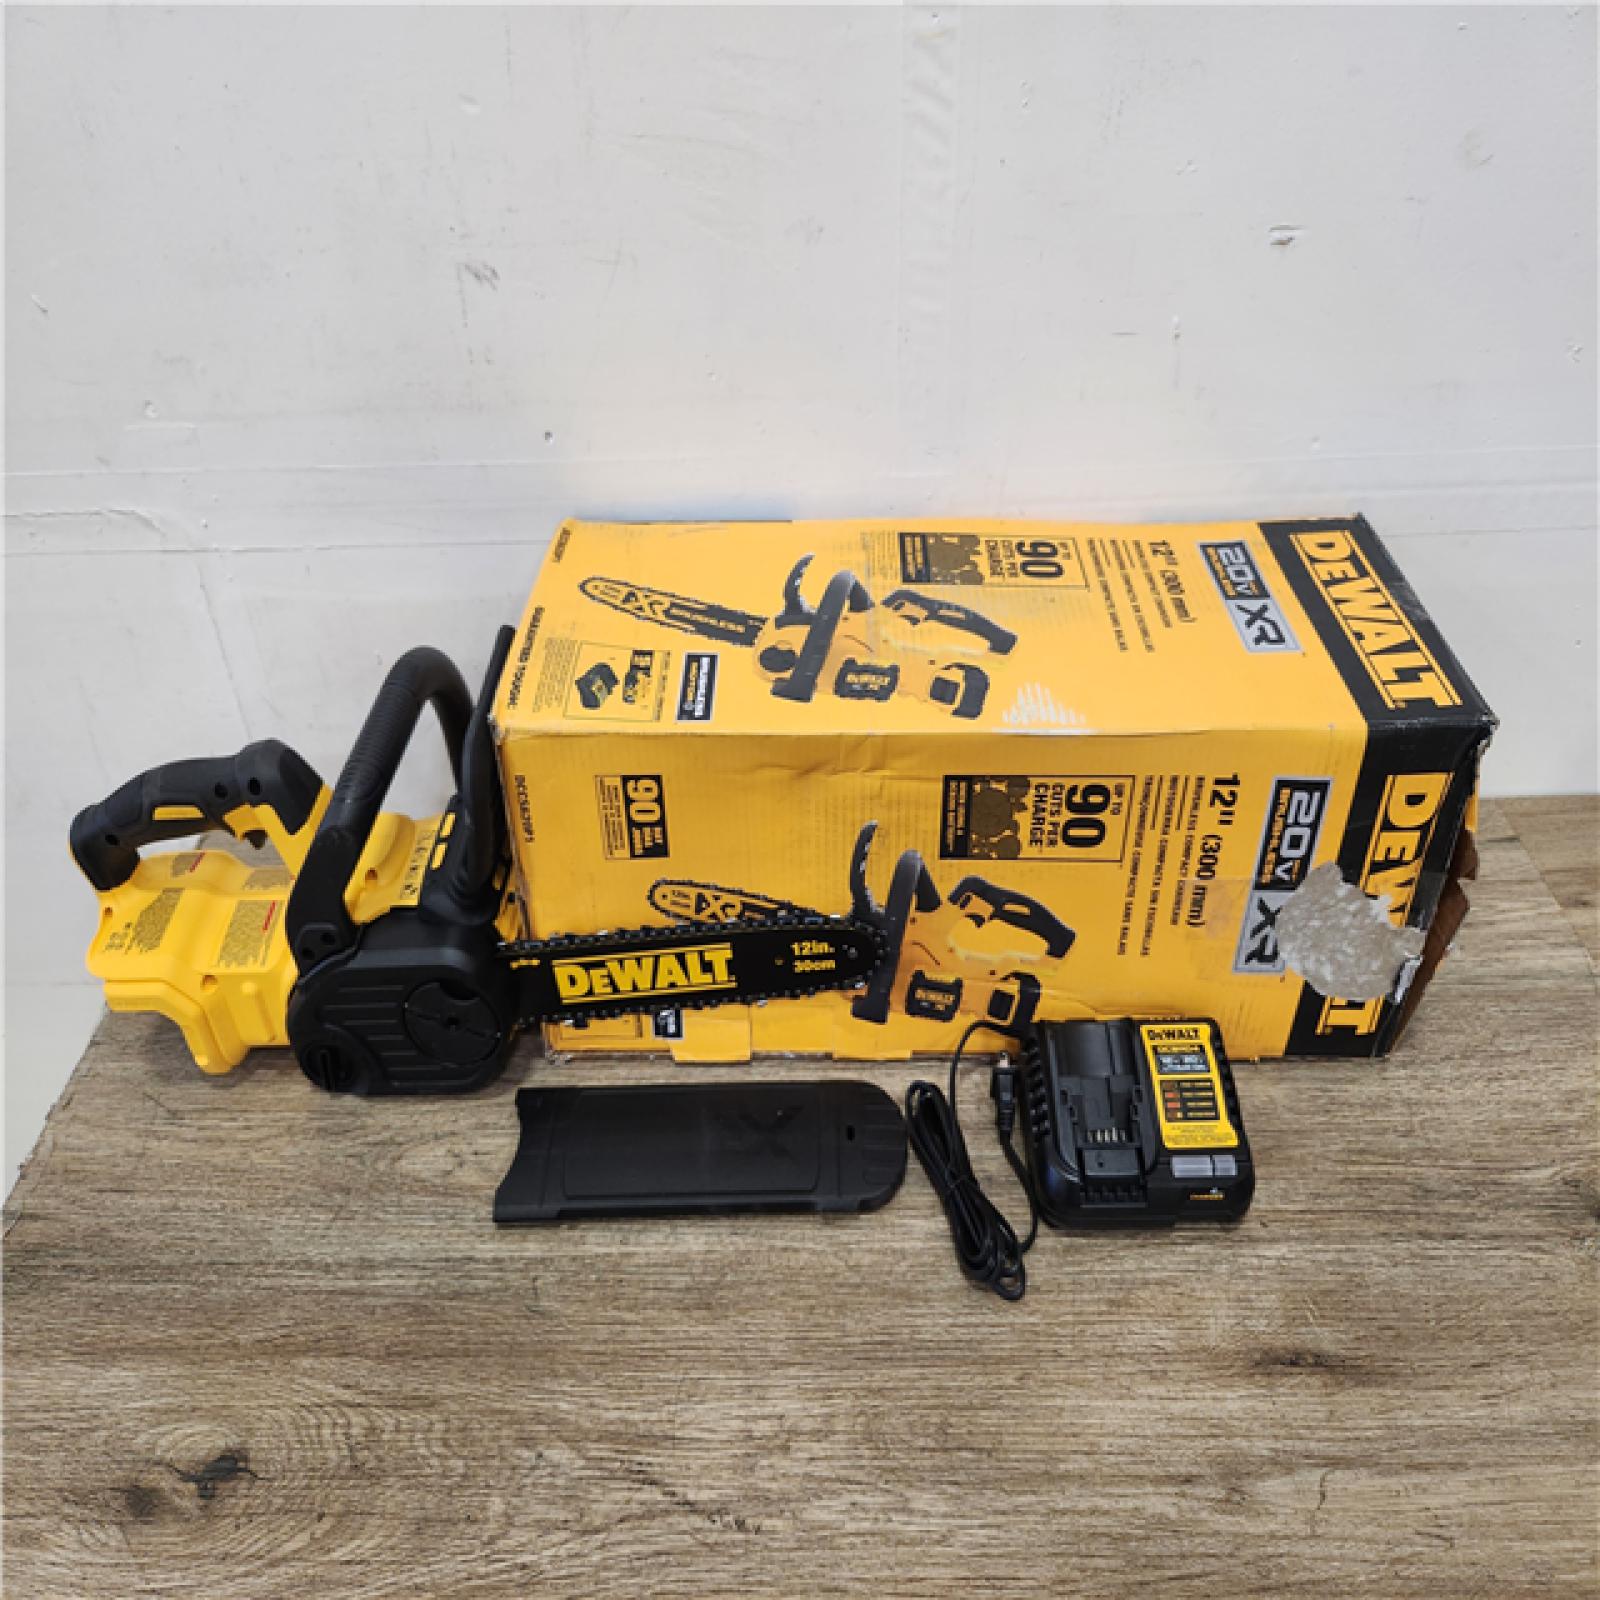 Phoenix Location NEW DEWALT 20V MAX 12in. Brushless Cordless Battery Powered Chainsaw Kit with Charger (No Battery)